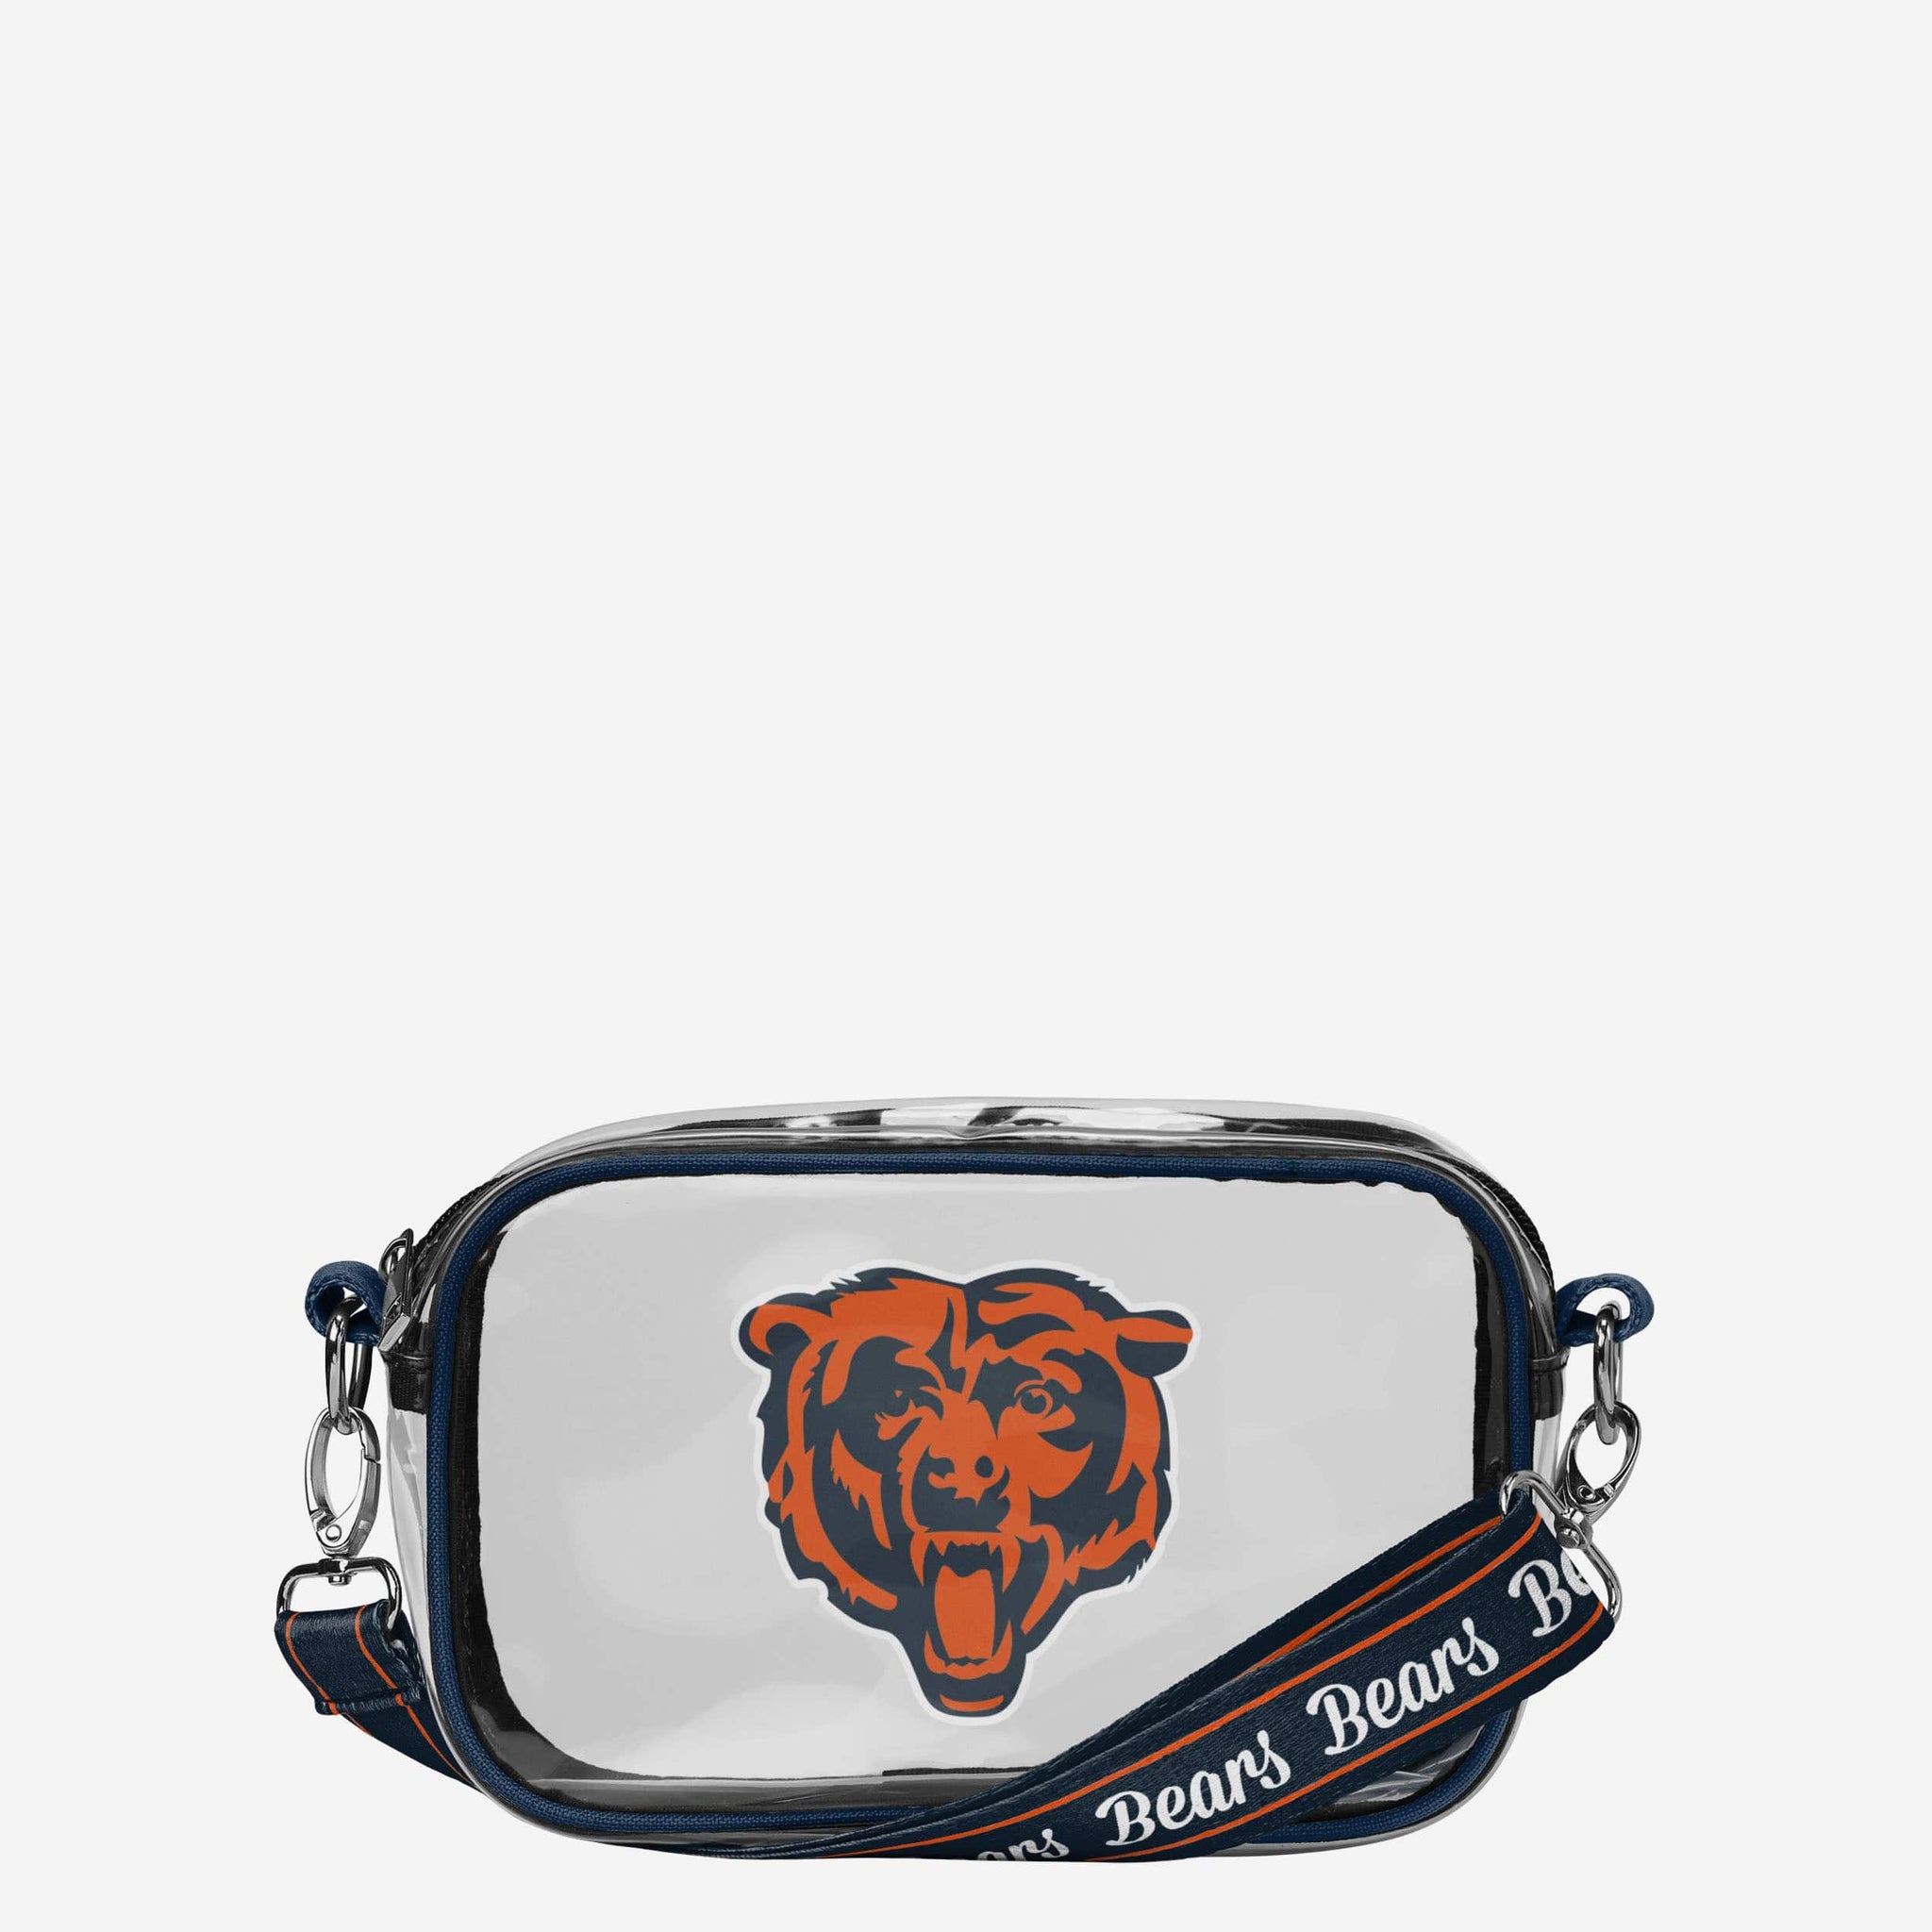  FOCO NFL Clear Stadium Messenger Bag for Football Game - Vinyl  (Chicago Bears) : Sports & Outdoors